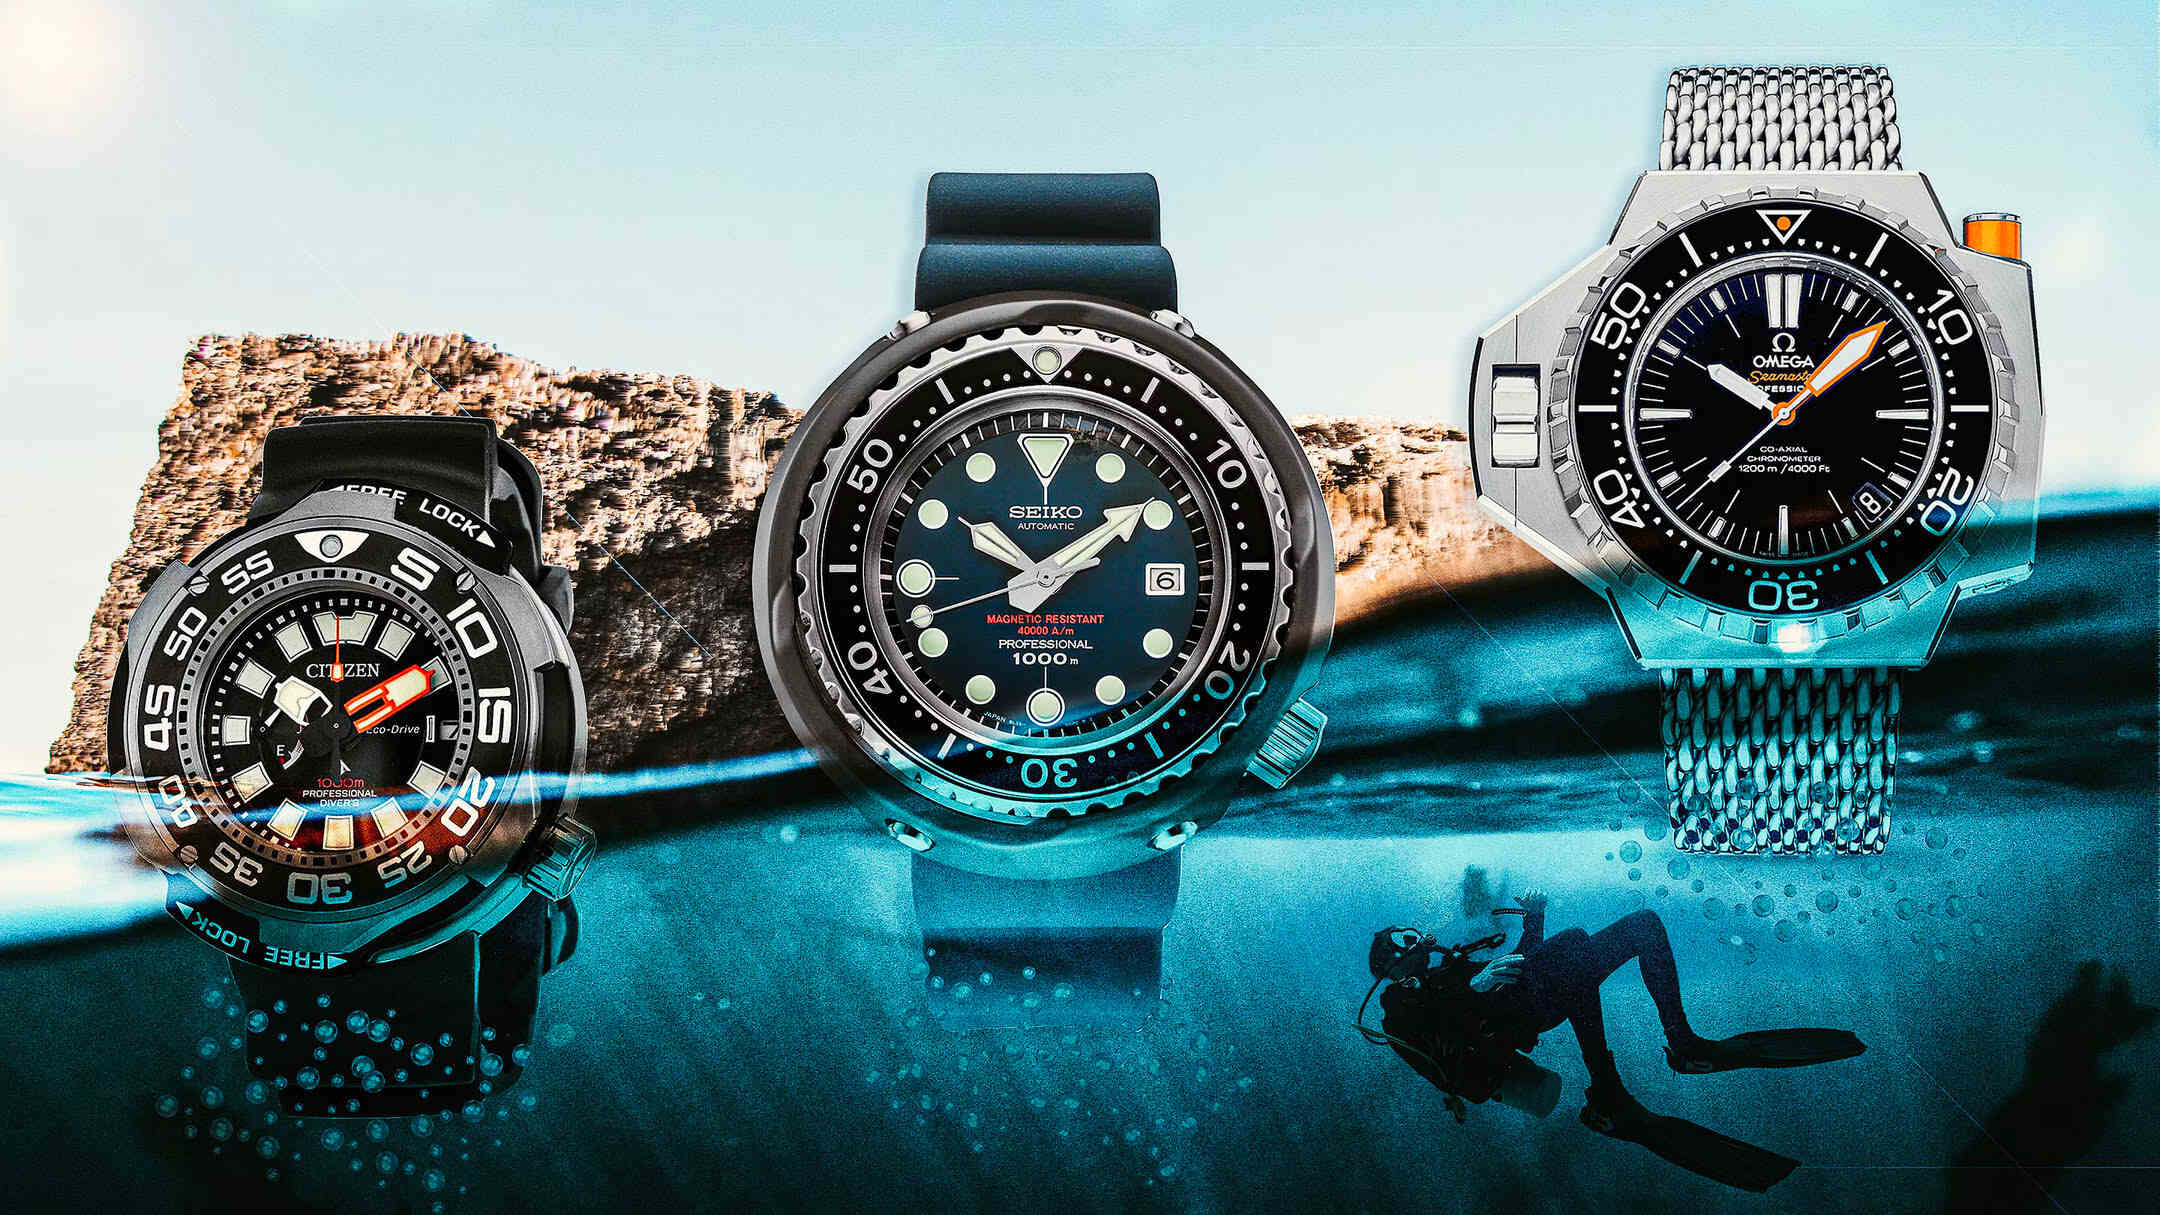 Diving Watch Review: The Best Options for Underwater Exploration